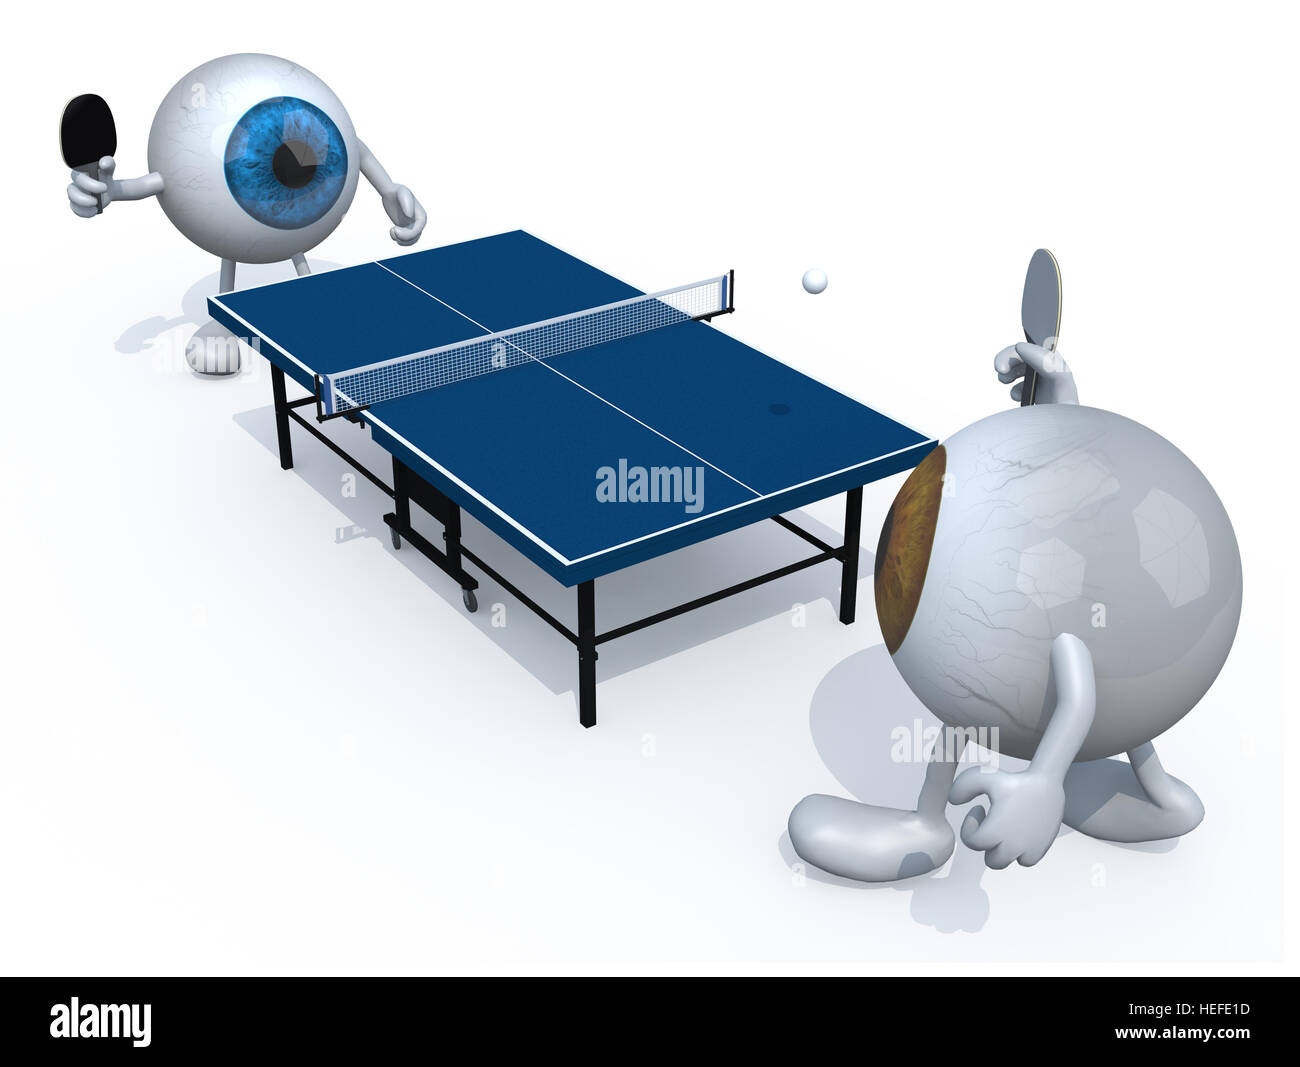 two eyeballs with arms and legs that playing to table tennis, 3d illustration Stock Photo